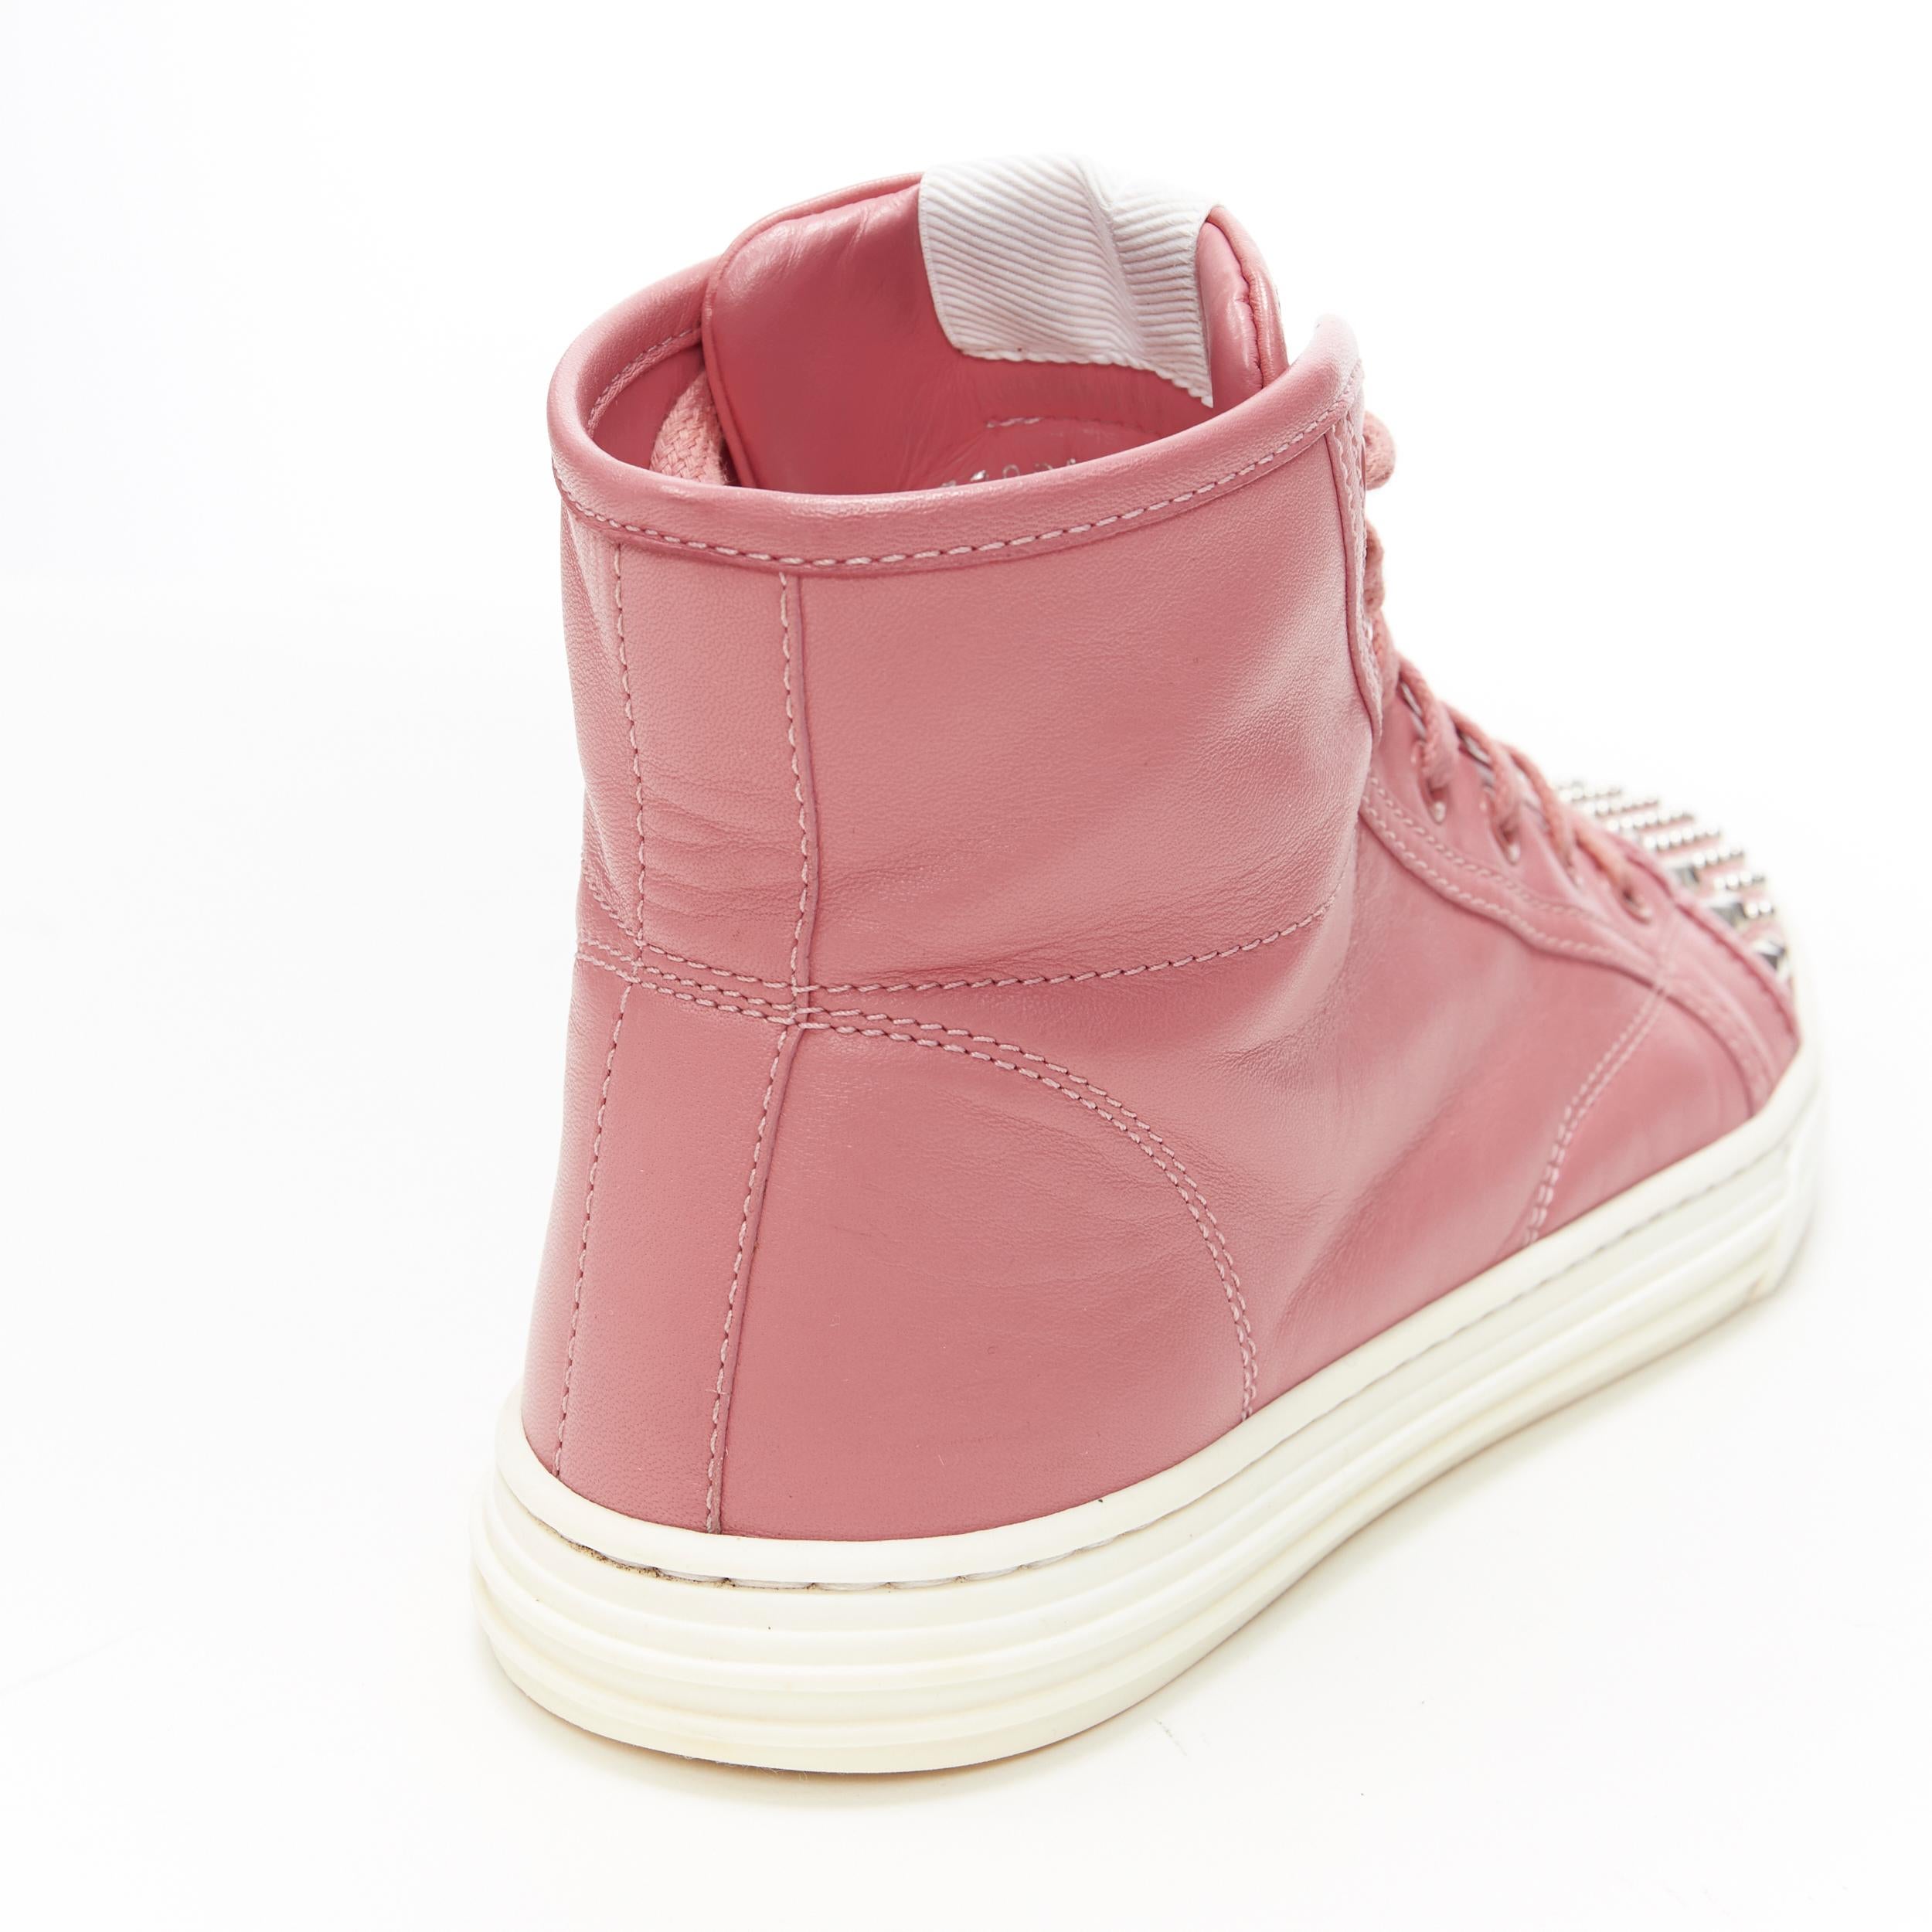 GUCCI pink leather studded toe cap high top casual sneakesr EU36.5 2